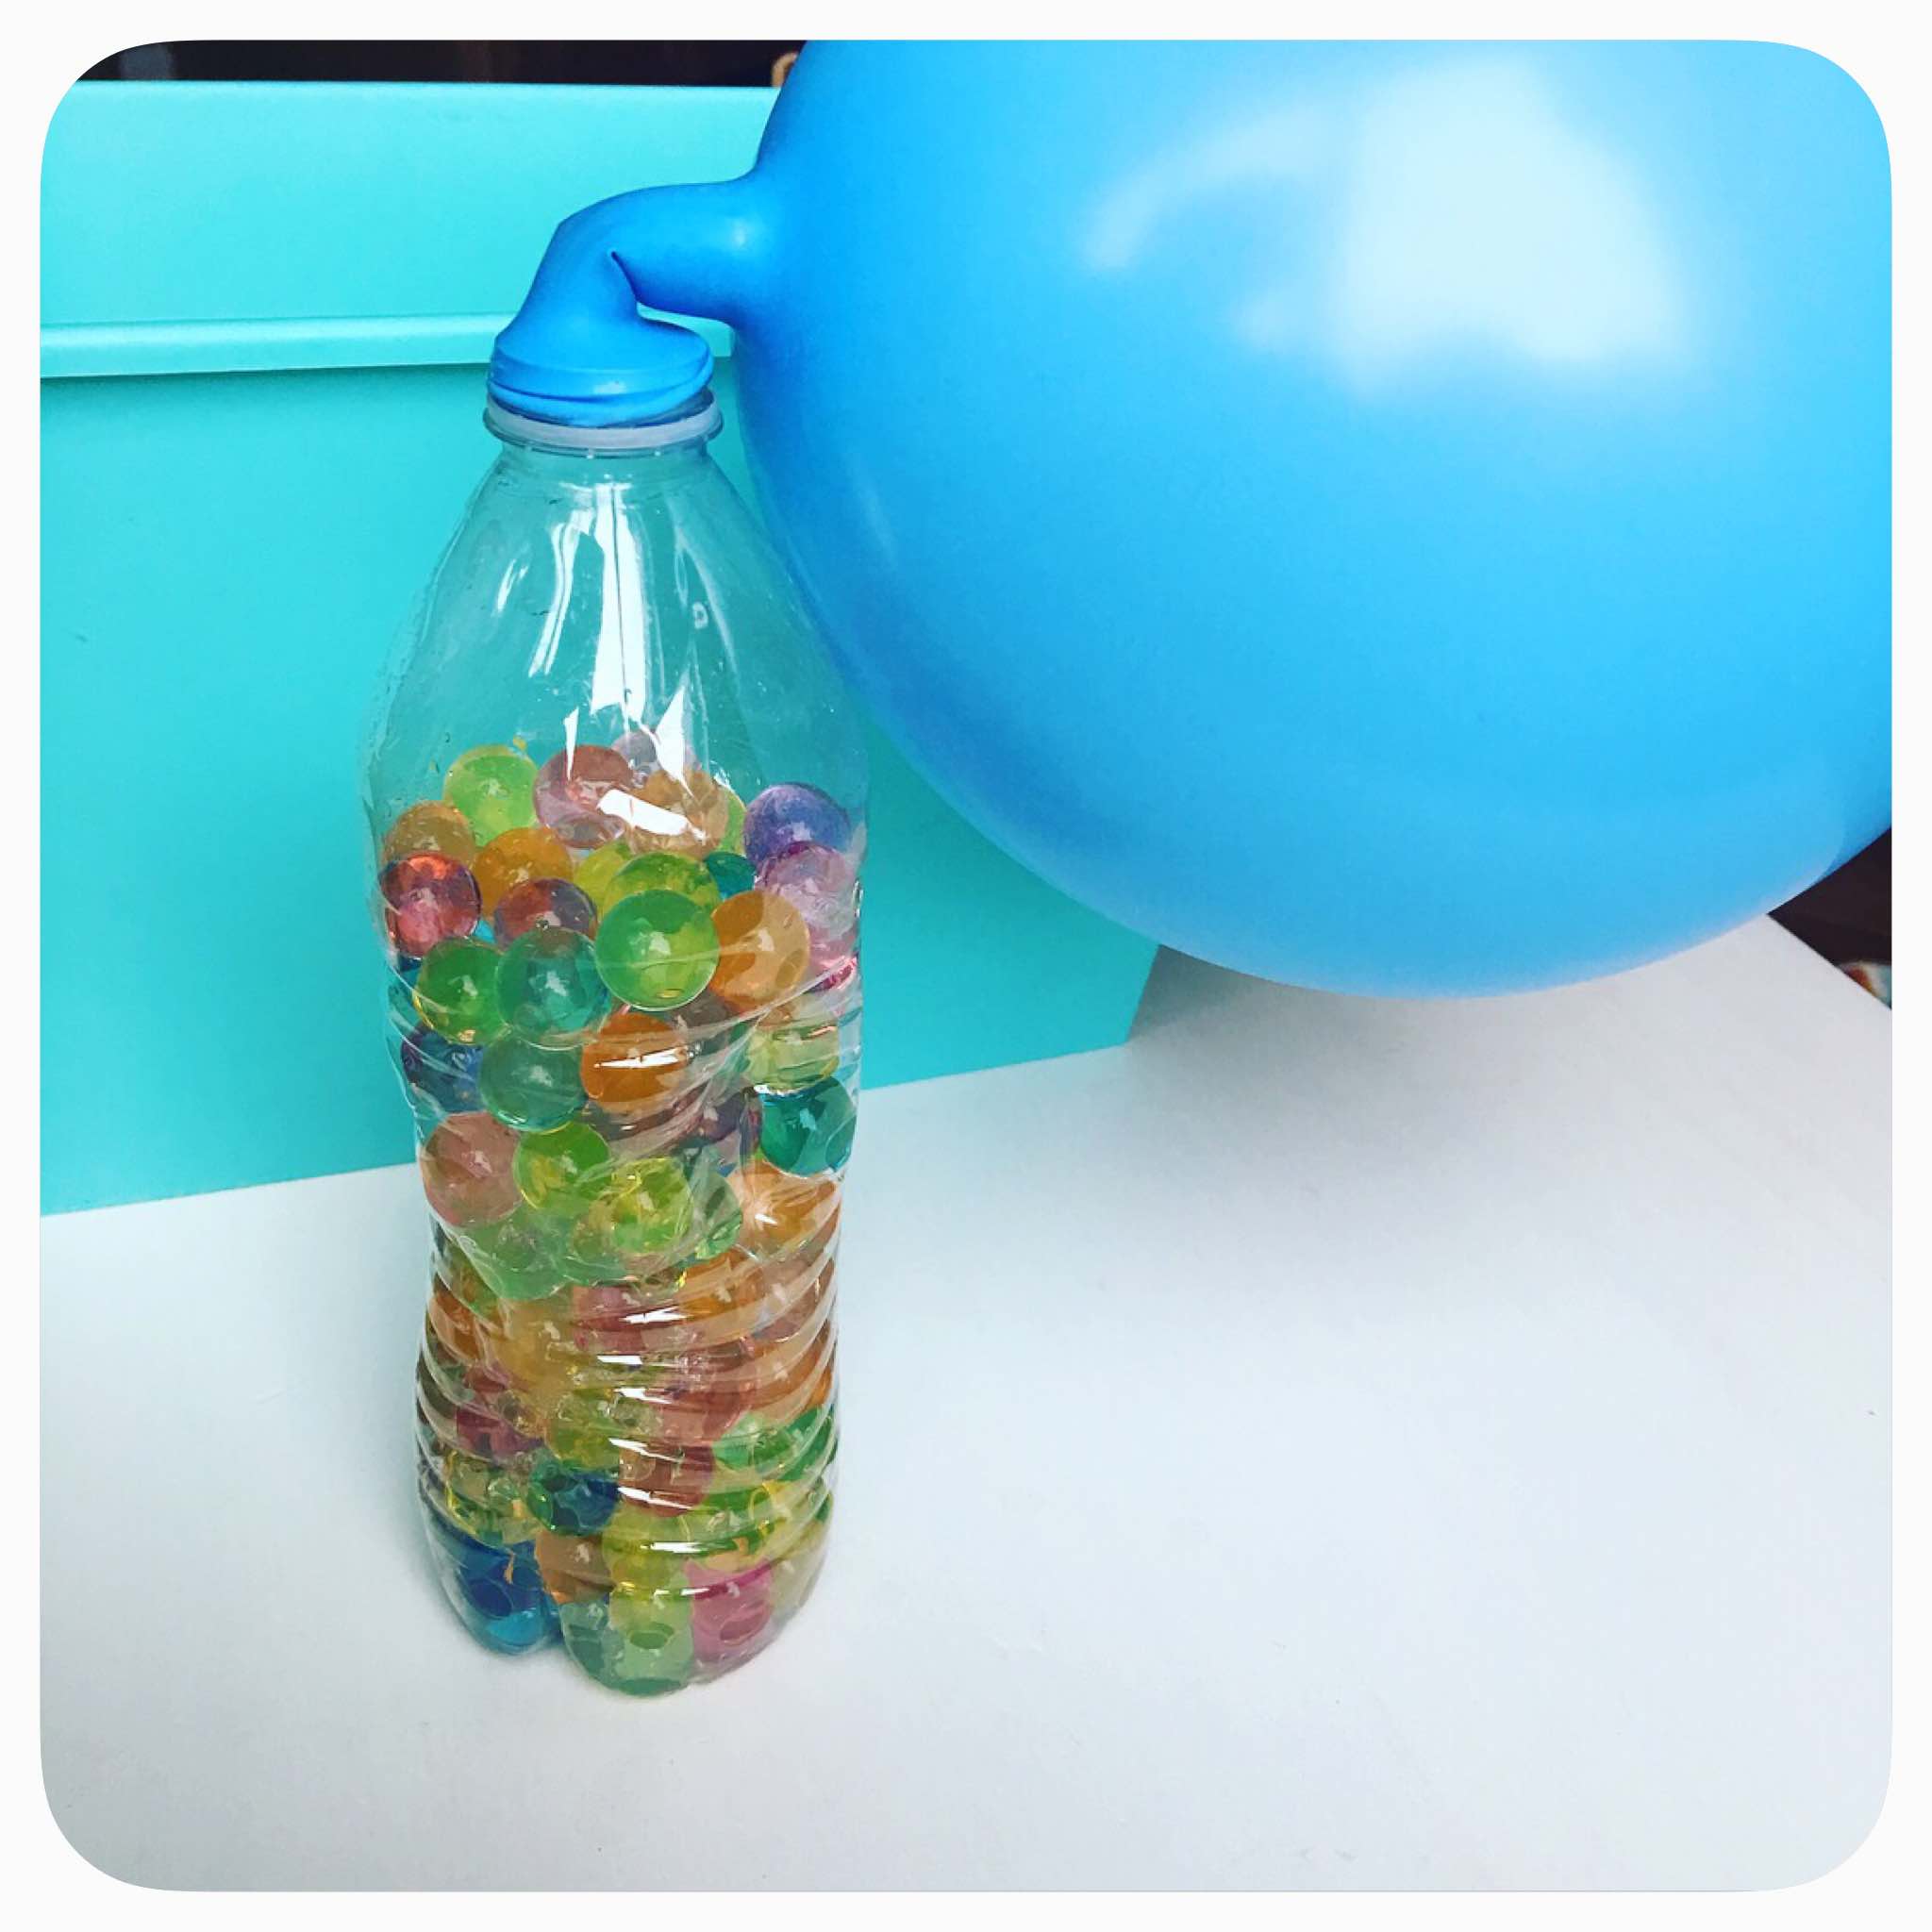 We have had our sensory tub of water beads out for days and wanted to try something new - bring on the balloons! Simple and fun activity your children can do. DIY Stress Ball using water beads / Orbeez